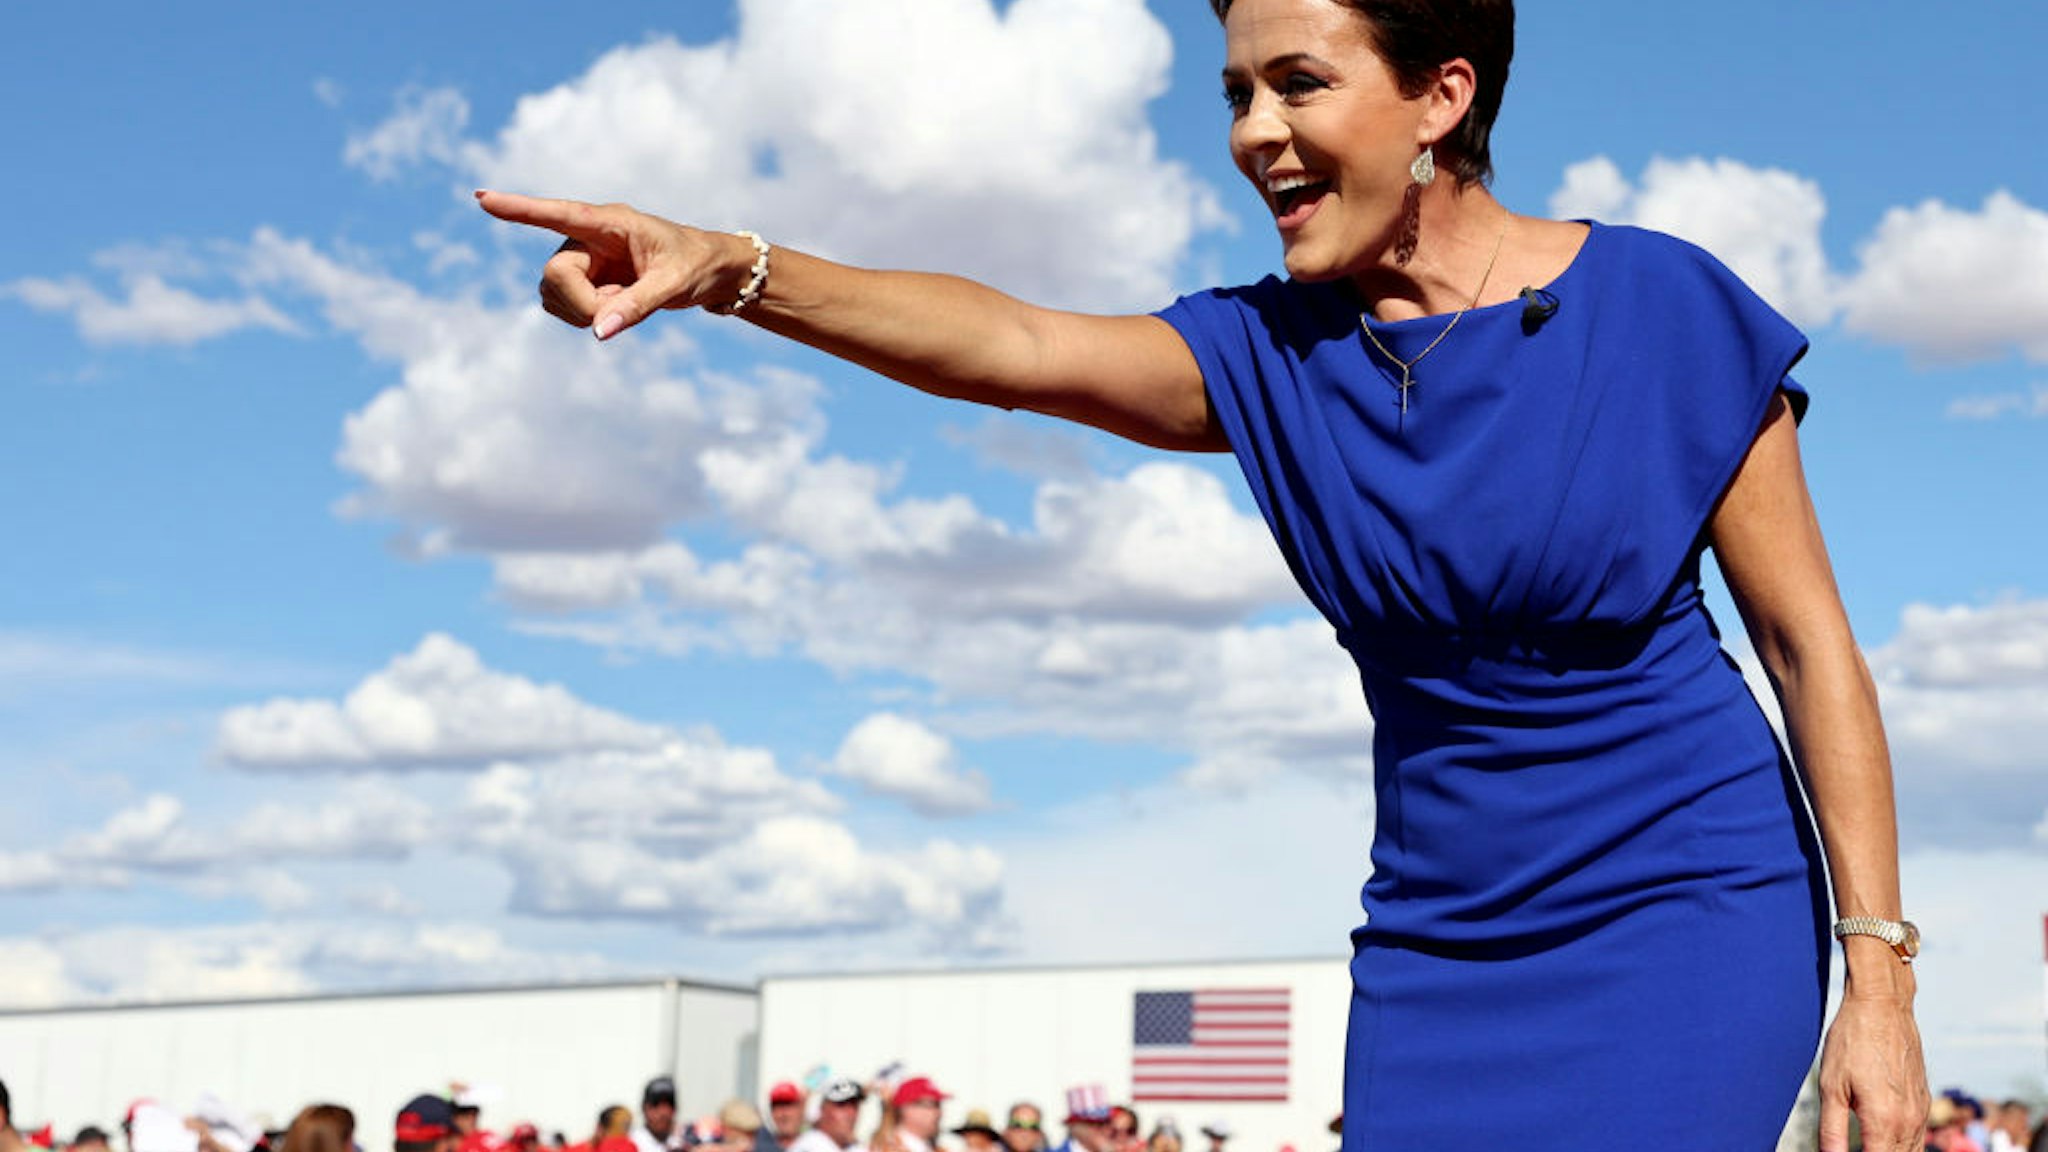 MESA, ARIZONA - OCTOBER 09: Arizona Republican nominee for governor Kari Lake points to the crowd at a 'Save America!' campaign rally with former U.S. President Donald Trump at Legacy Sports USA on October 09, 2022 in Mesa, Arizona. Former U.S. President Donald Trump is holding a campaign style rally for Arizona GOP candidates ahead of the state's midterm election on November 8th. (Photo by Mario Tama/Getty Images)